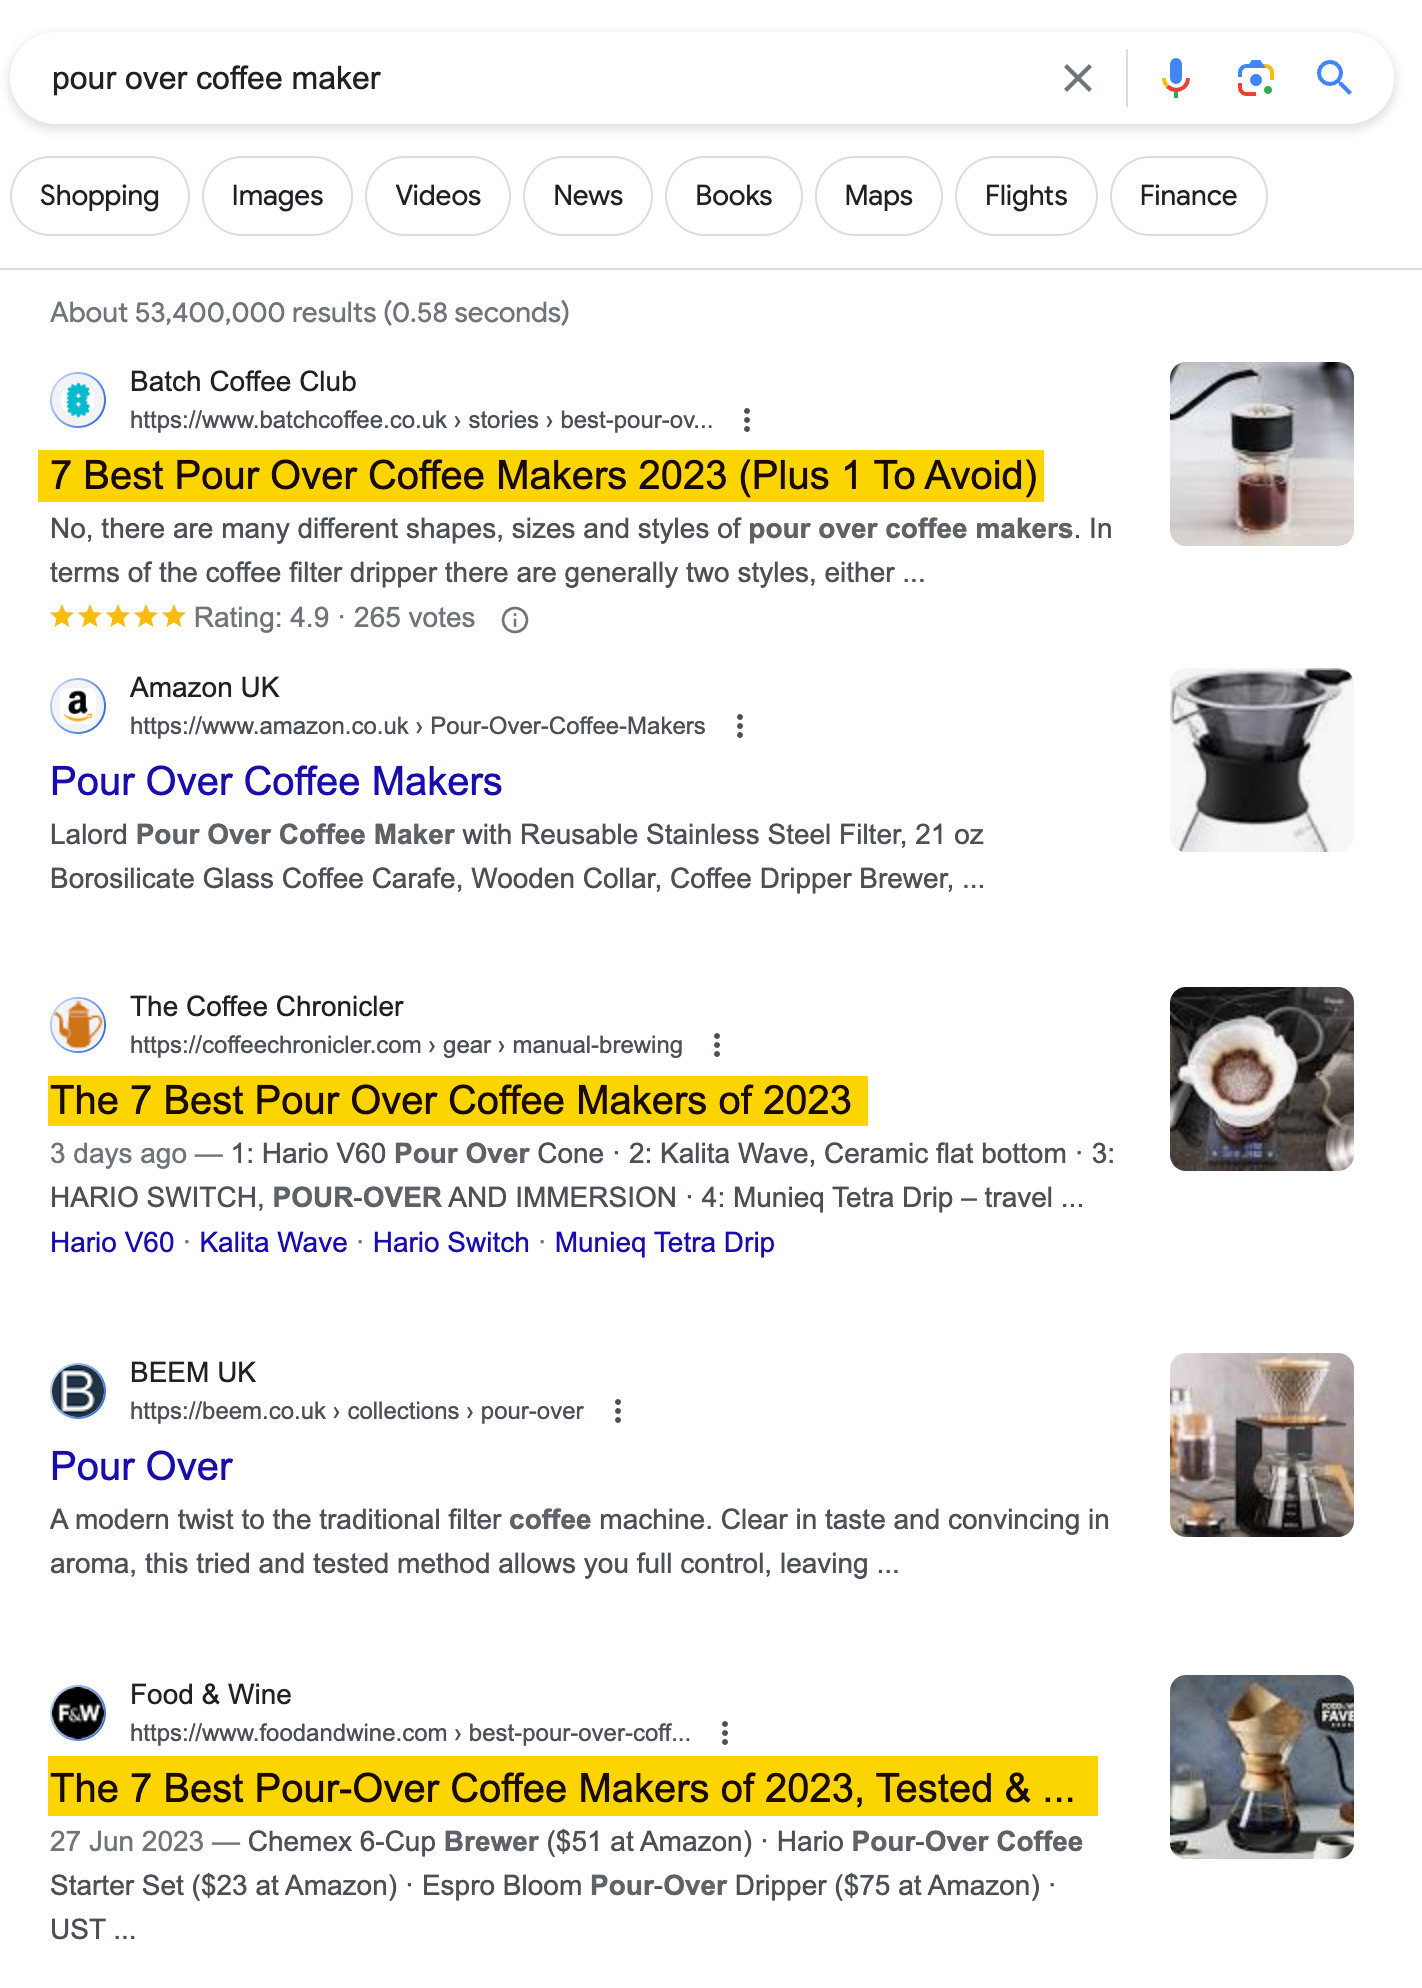 Search results for "pour over coffee maker"
